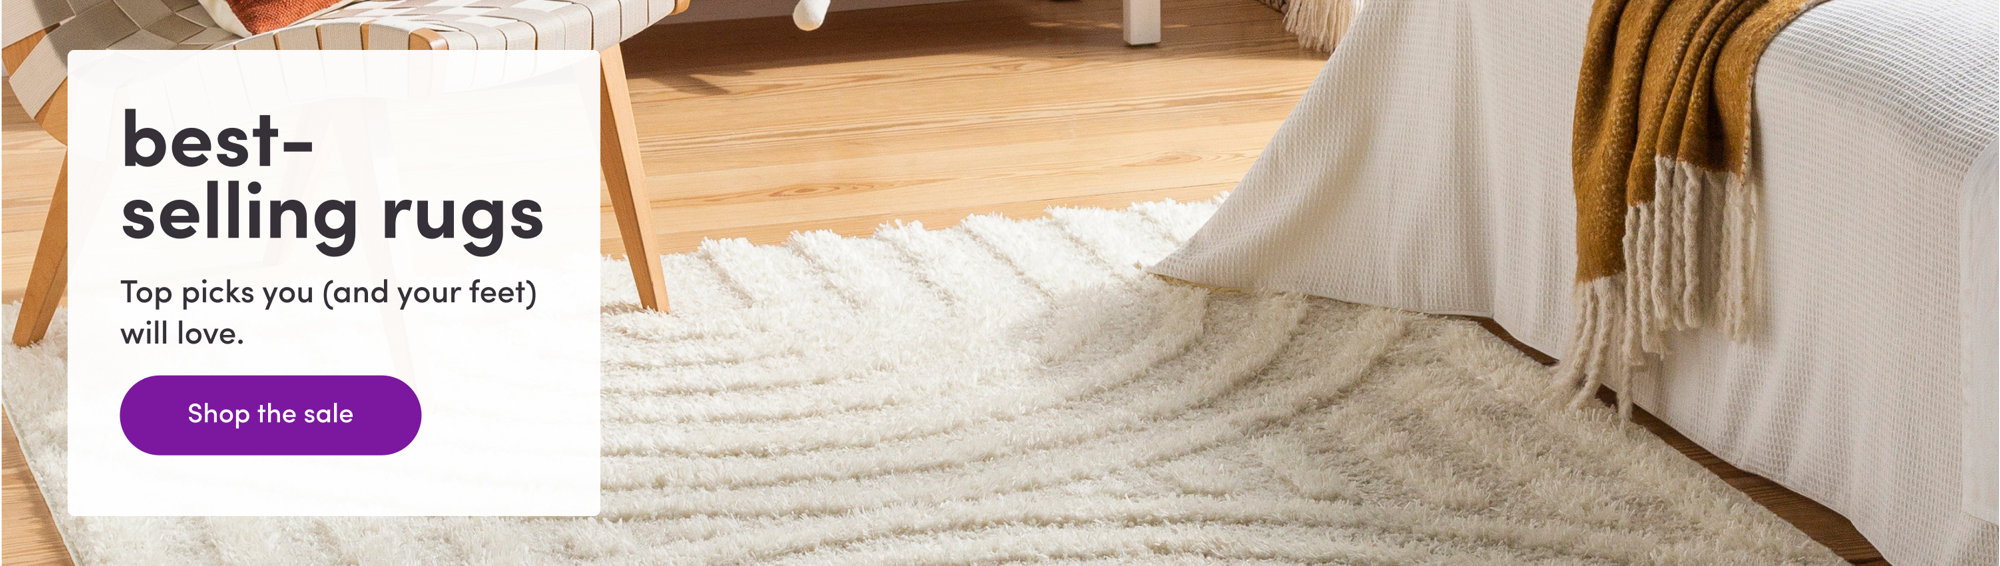 best-selling rugs. Top picks you (and your feet) will love. Shop the sale